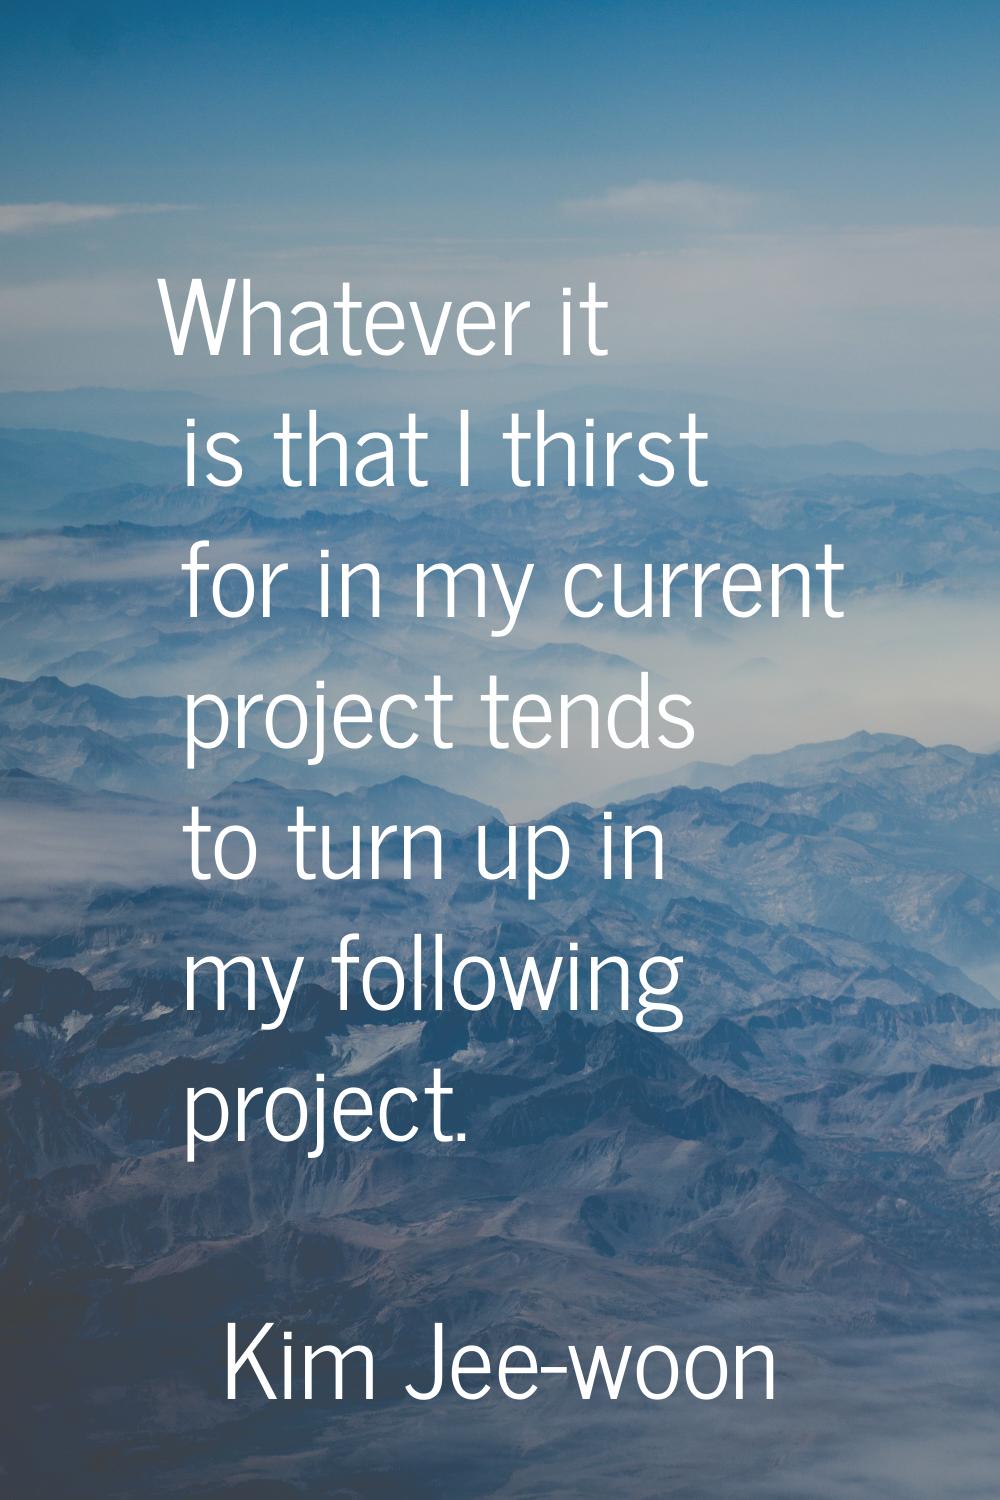 Whatever it is that I thirst for in my current project tends to turn up in my following project.